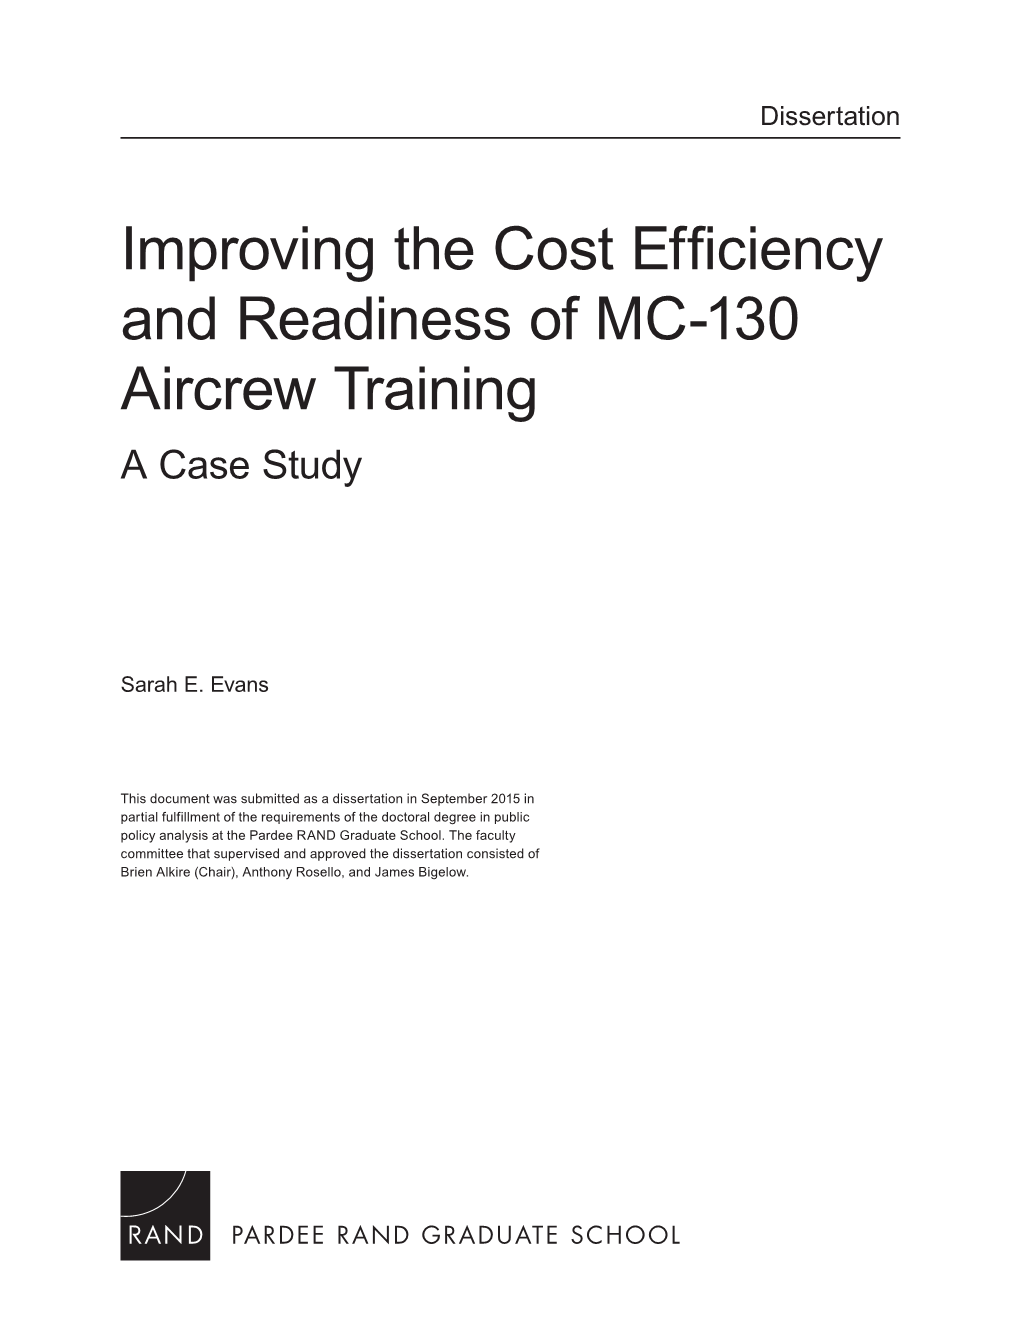 Improving the Cost Efficiency and Readiness of MC-130 Aircrew Training a Case Study